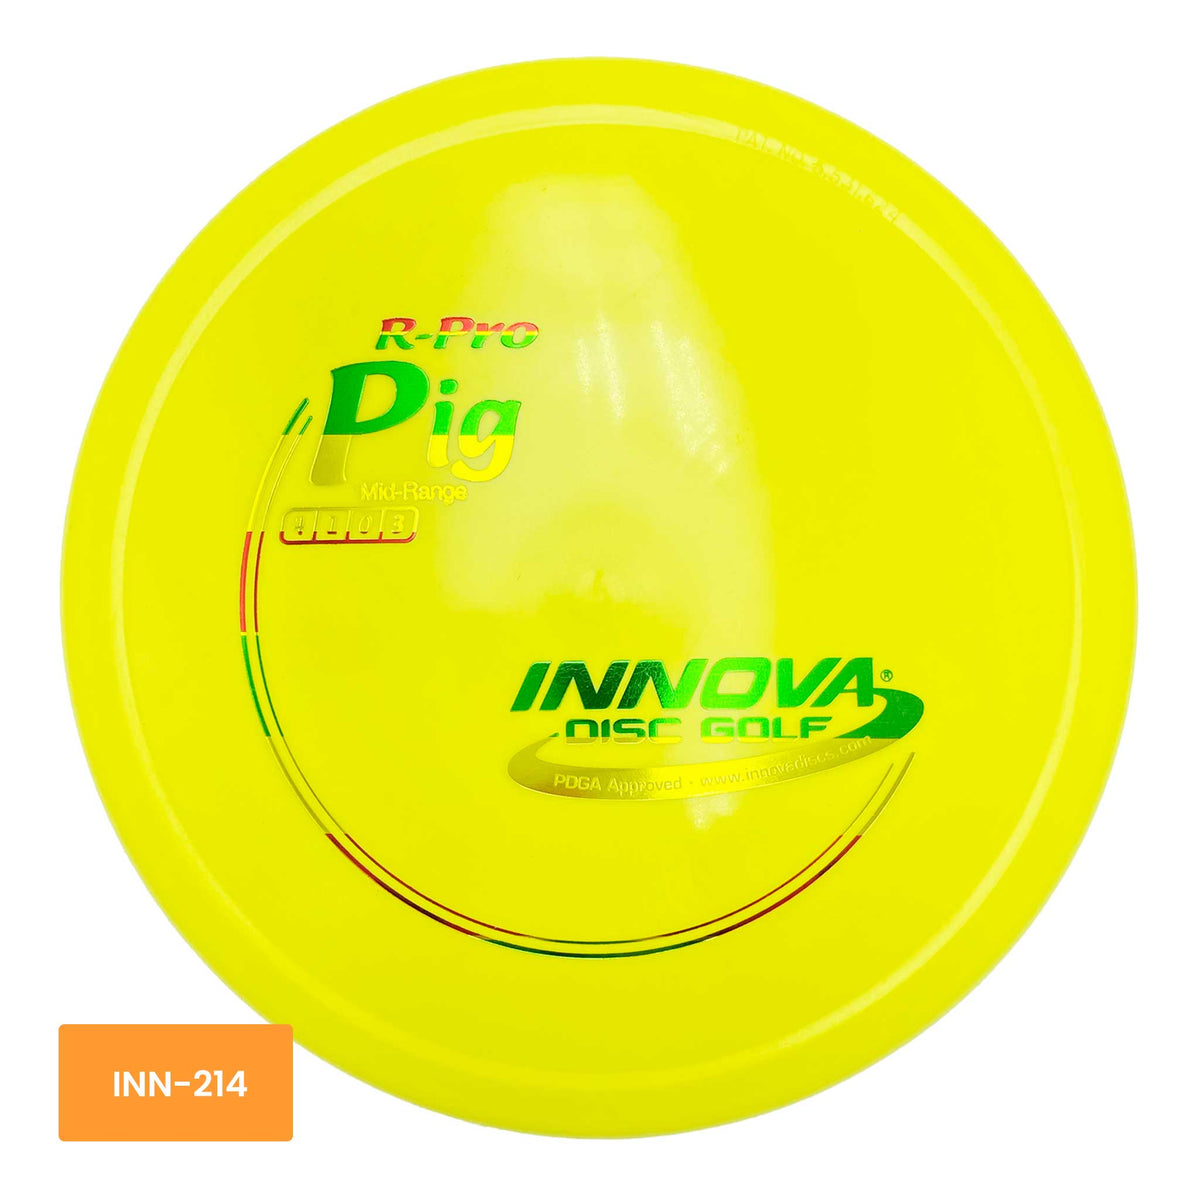 Innova Disc Golf R-Pro Pig putter and approach - Yellow